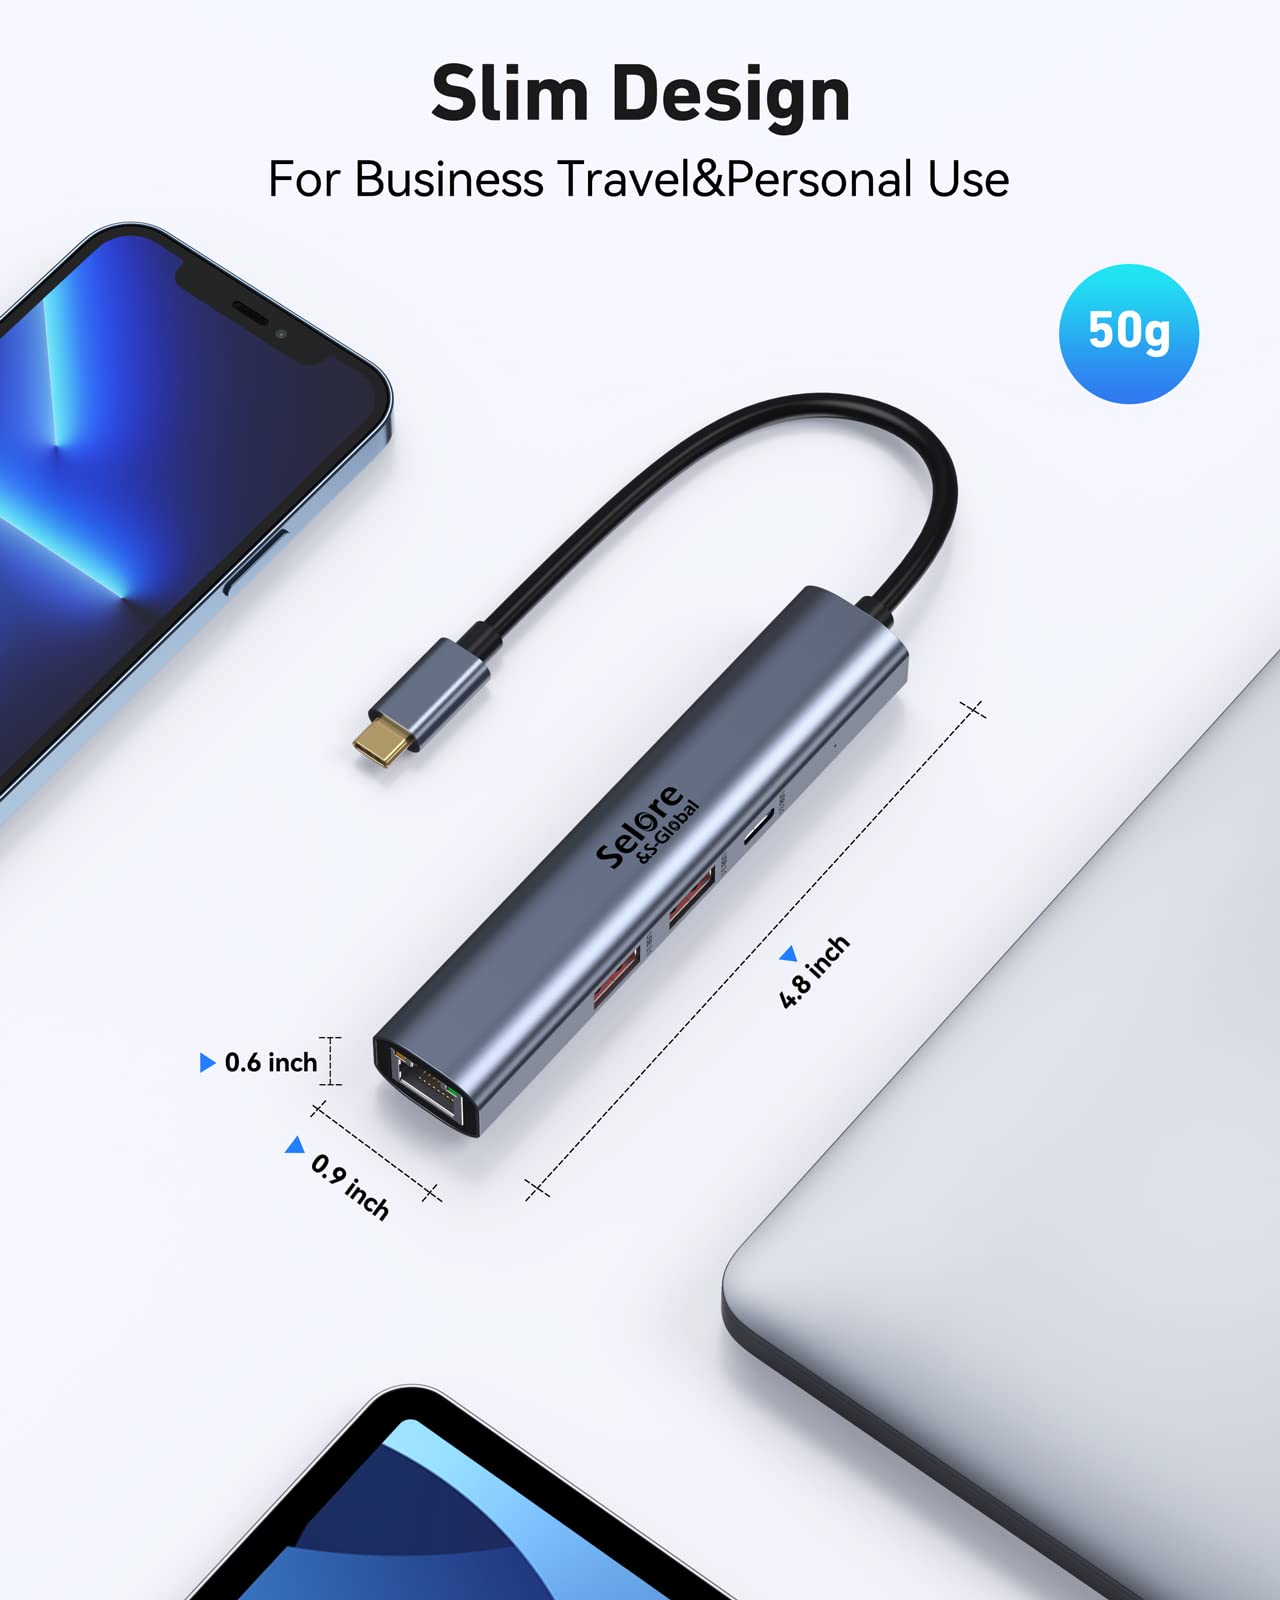 USB C to Ethernet Adapter,10Gbps USB C Hub Multiport Adapters with Gigabit RJ45,2 USB 3.1 Ports and USB C 3.1 Port,4 in 1 USB C Adapter for MacBook Pro/Air, iMac, iPad, Dell,Galaxy, Surface, and More